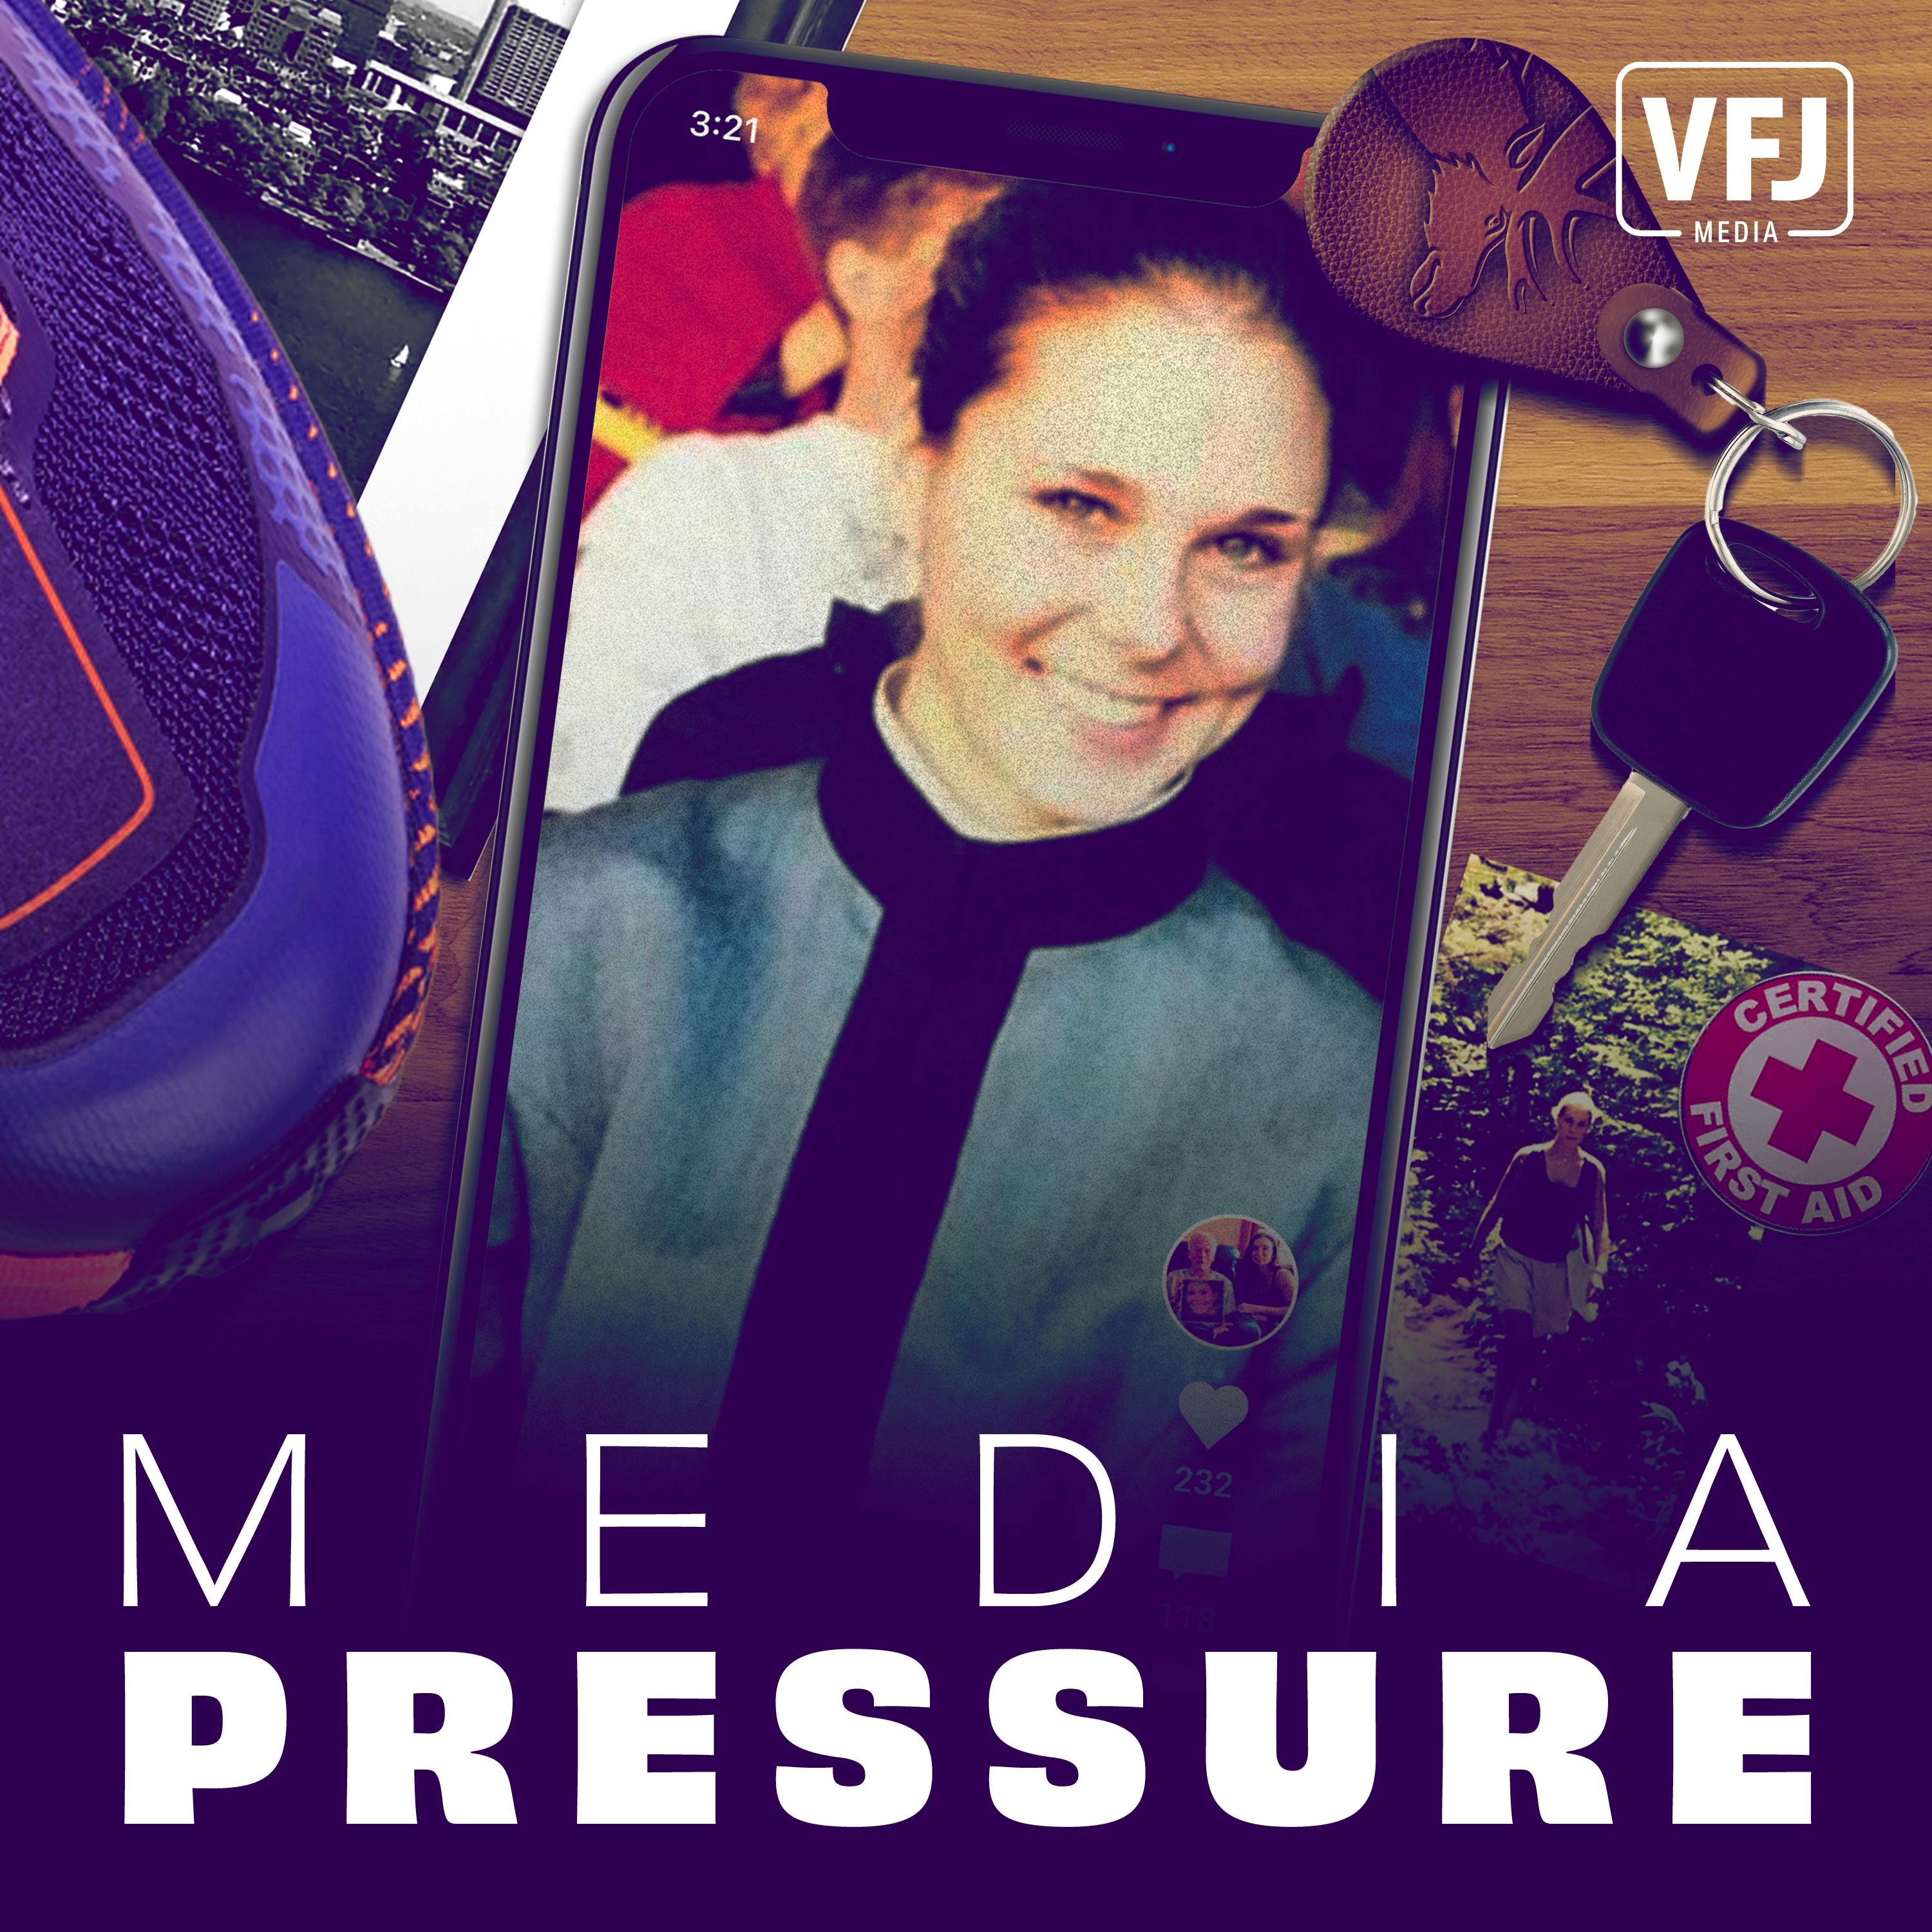 Media Pressure by Voices for Justice Media